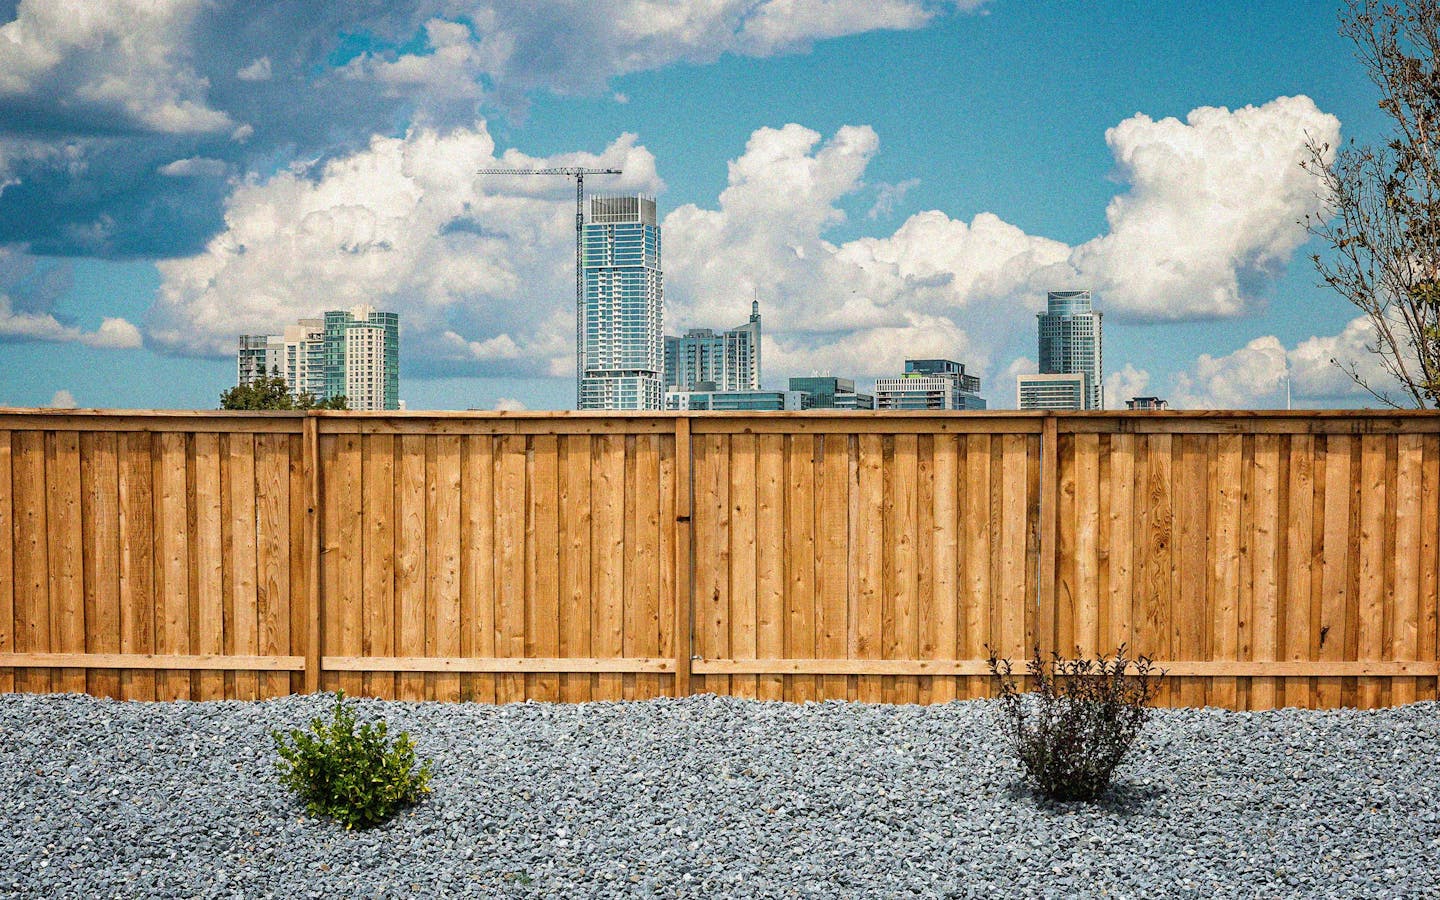 Austin Is Getting Bigger. So Are Its Fences.